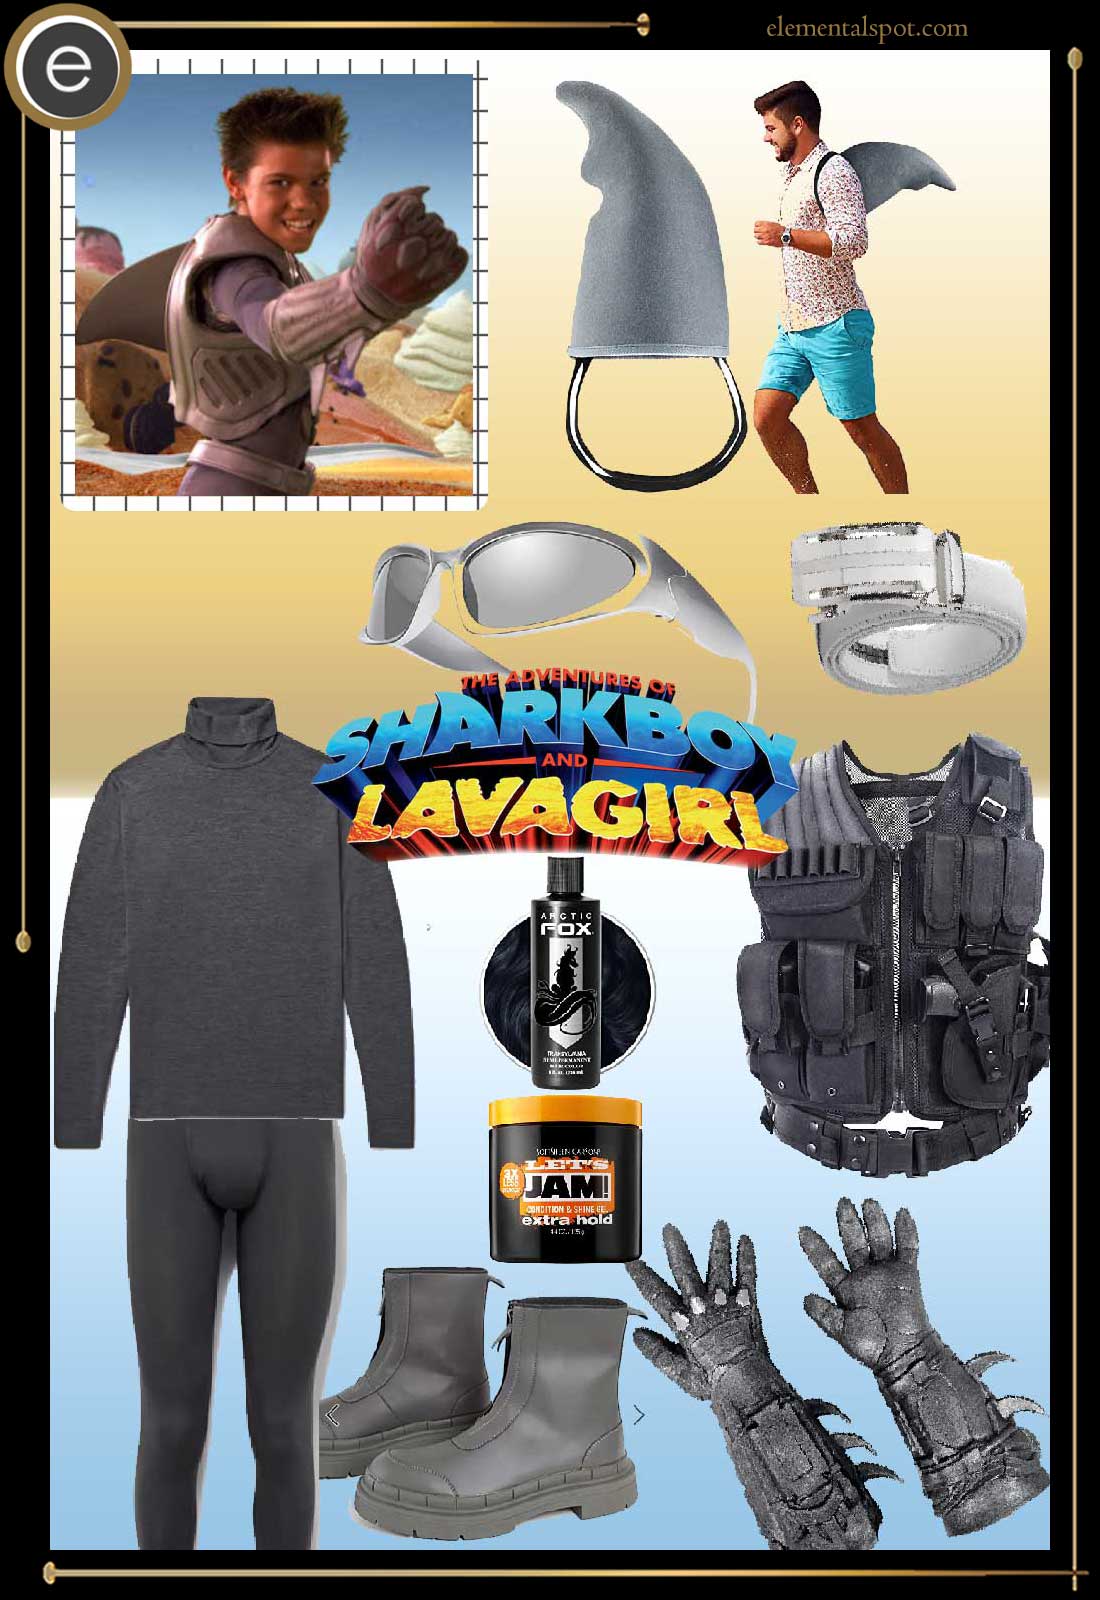 Dress Up Like Sharkboy from The Adventures of Sharkboy and Lavagirl - Elemental Spot